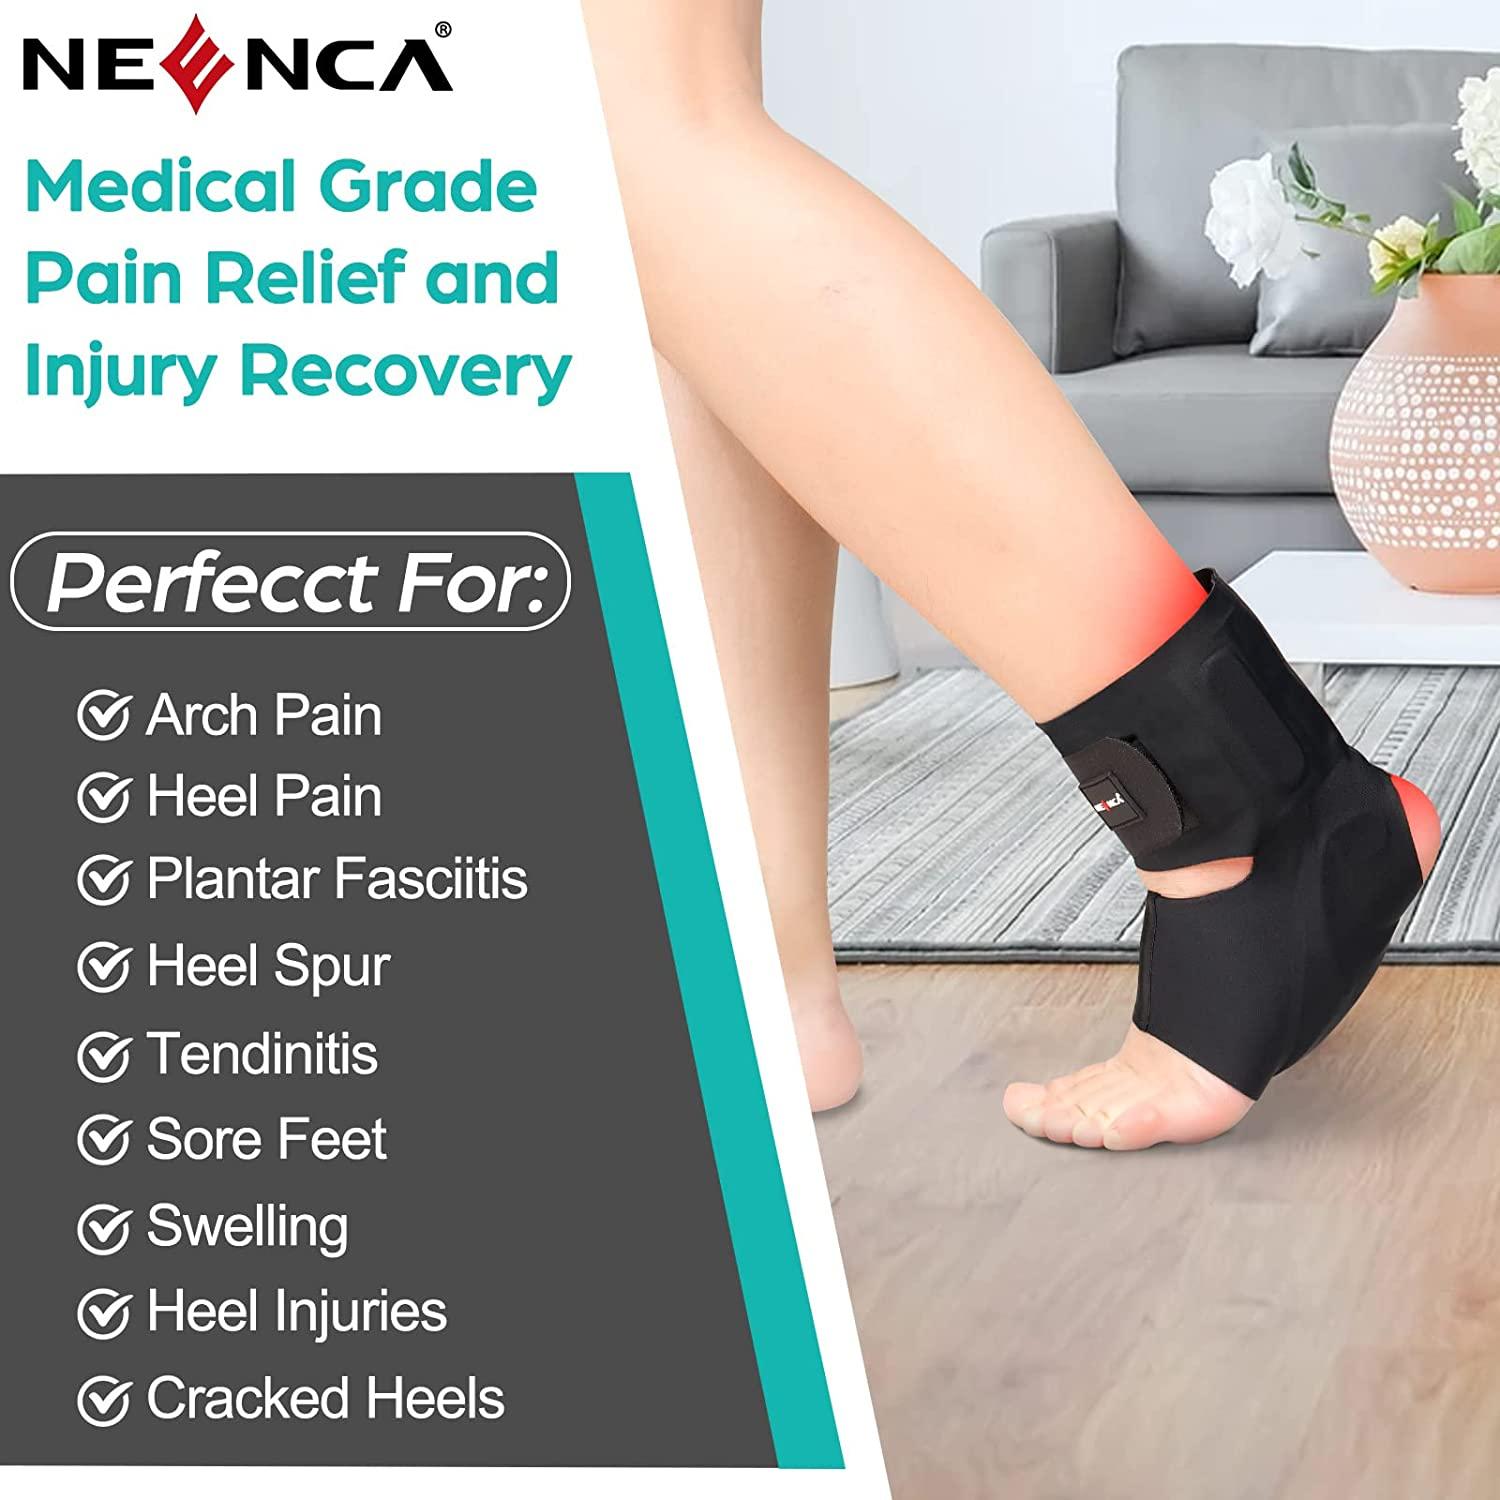 NEENCA Ankle Brace with Inflatable Heel Pads, Medical Ankle Support  Protector with 2 Air Cushions for Arch/Heel Pain Relief, Plantar Fasciitis,  Heel Spur,Tendinitis, Sore Feet, Swelling, Heel Injuries Inflatable Heel  Pad L